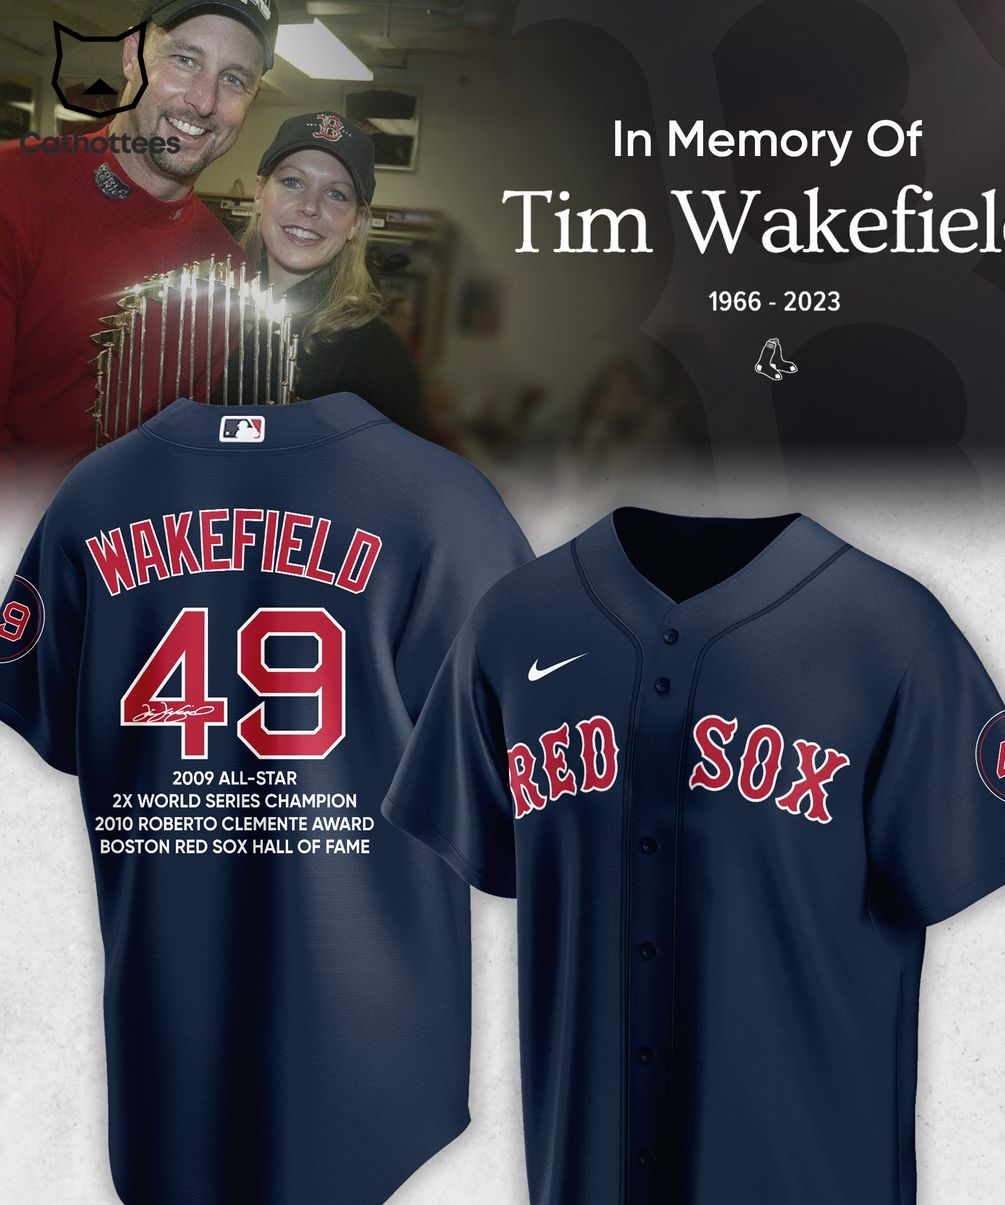 Wakefield 49 2009 All-Star Red Sox Baseball Jersey - Cathottees